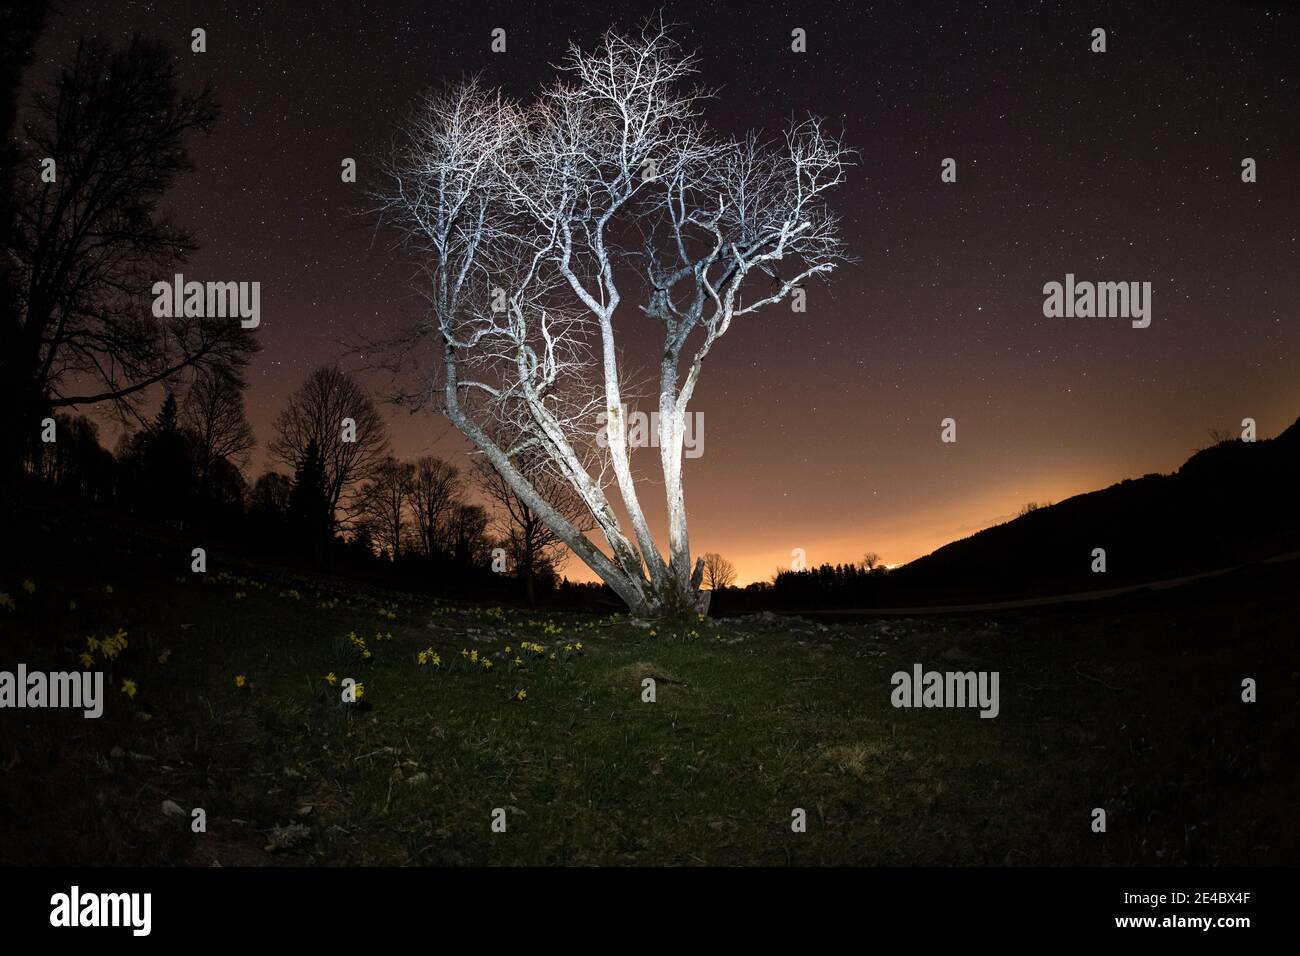 single trees at night with stars and daffodils in the foreground Stock Photo